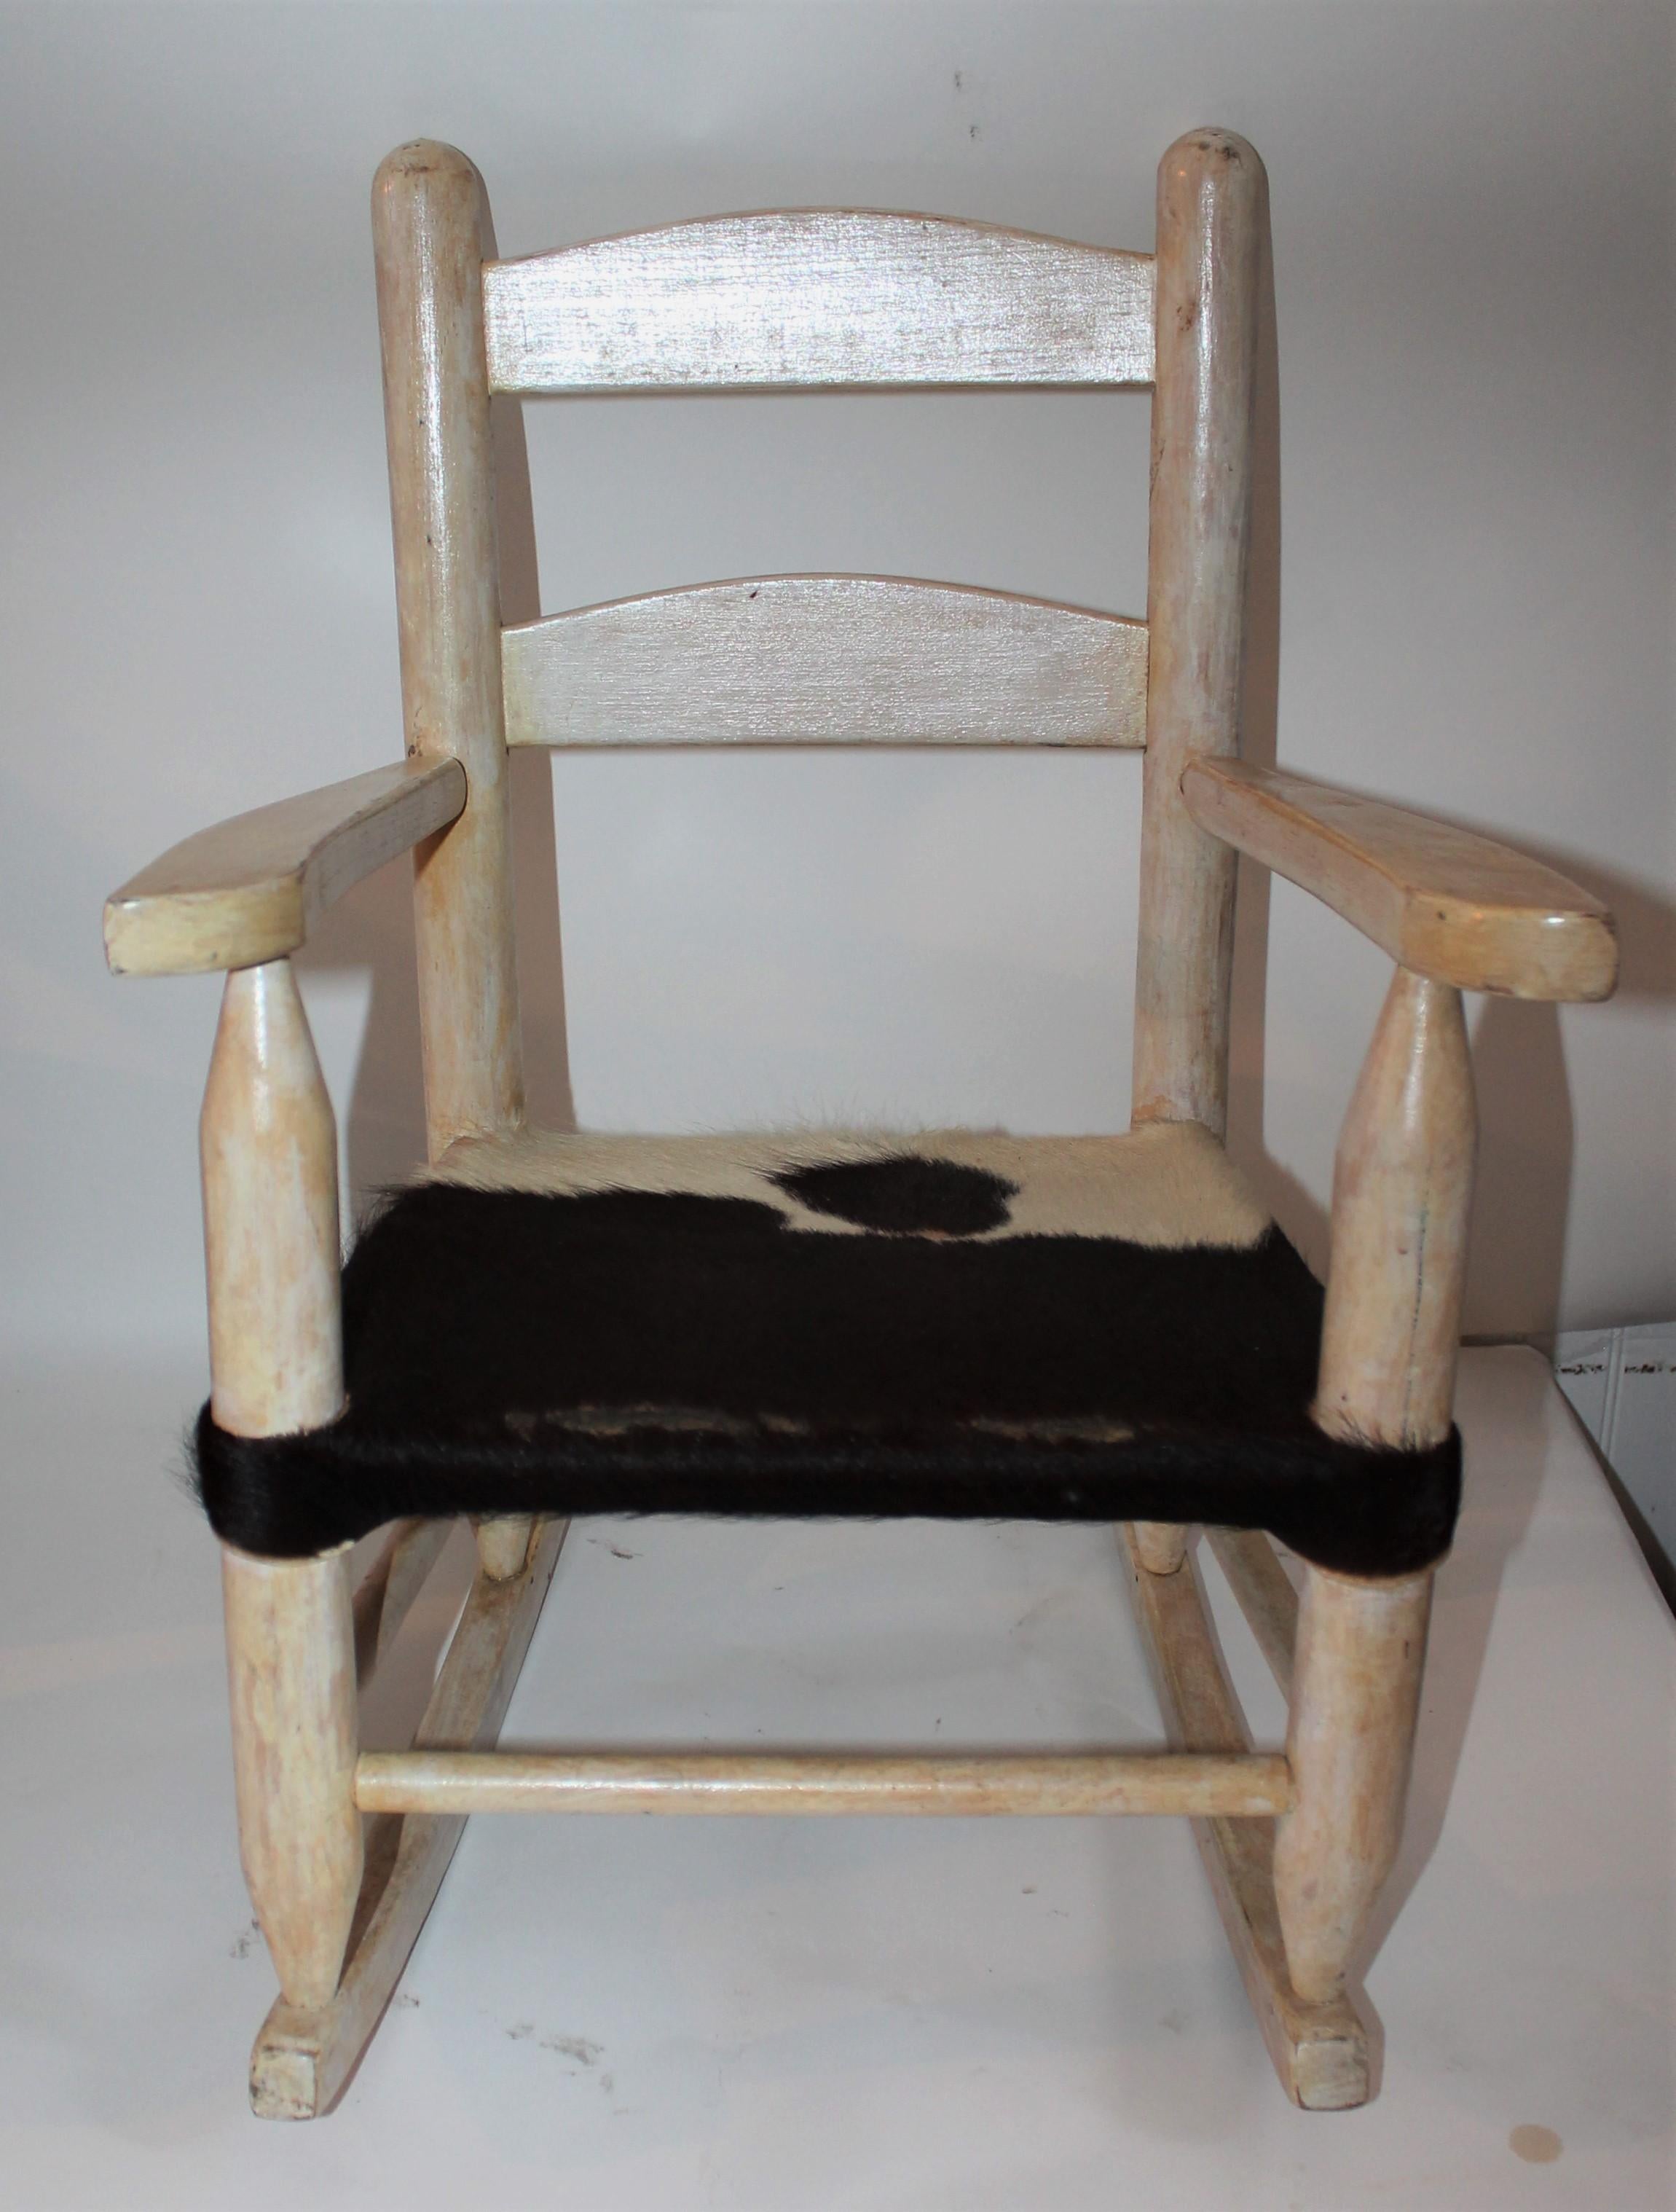 This fine and sturdy original white painted children's rocking chair is in fine condition and has a upholstered seat in cow skin.